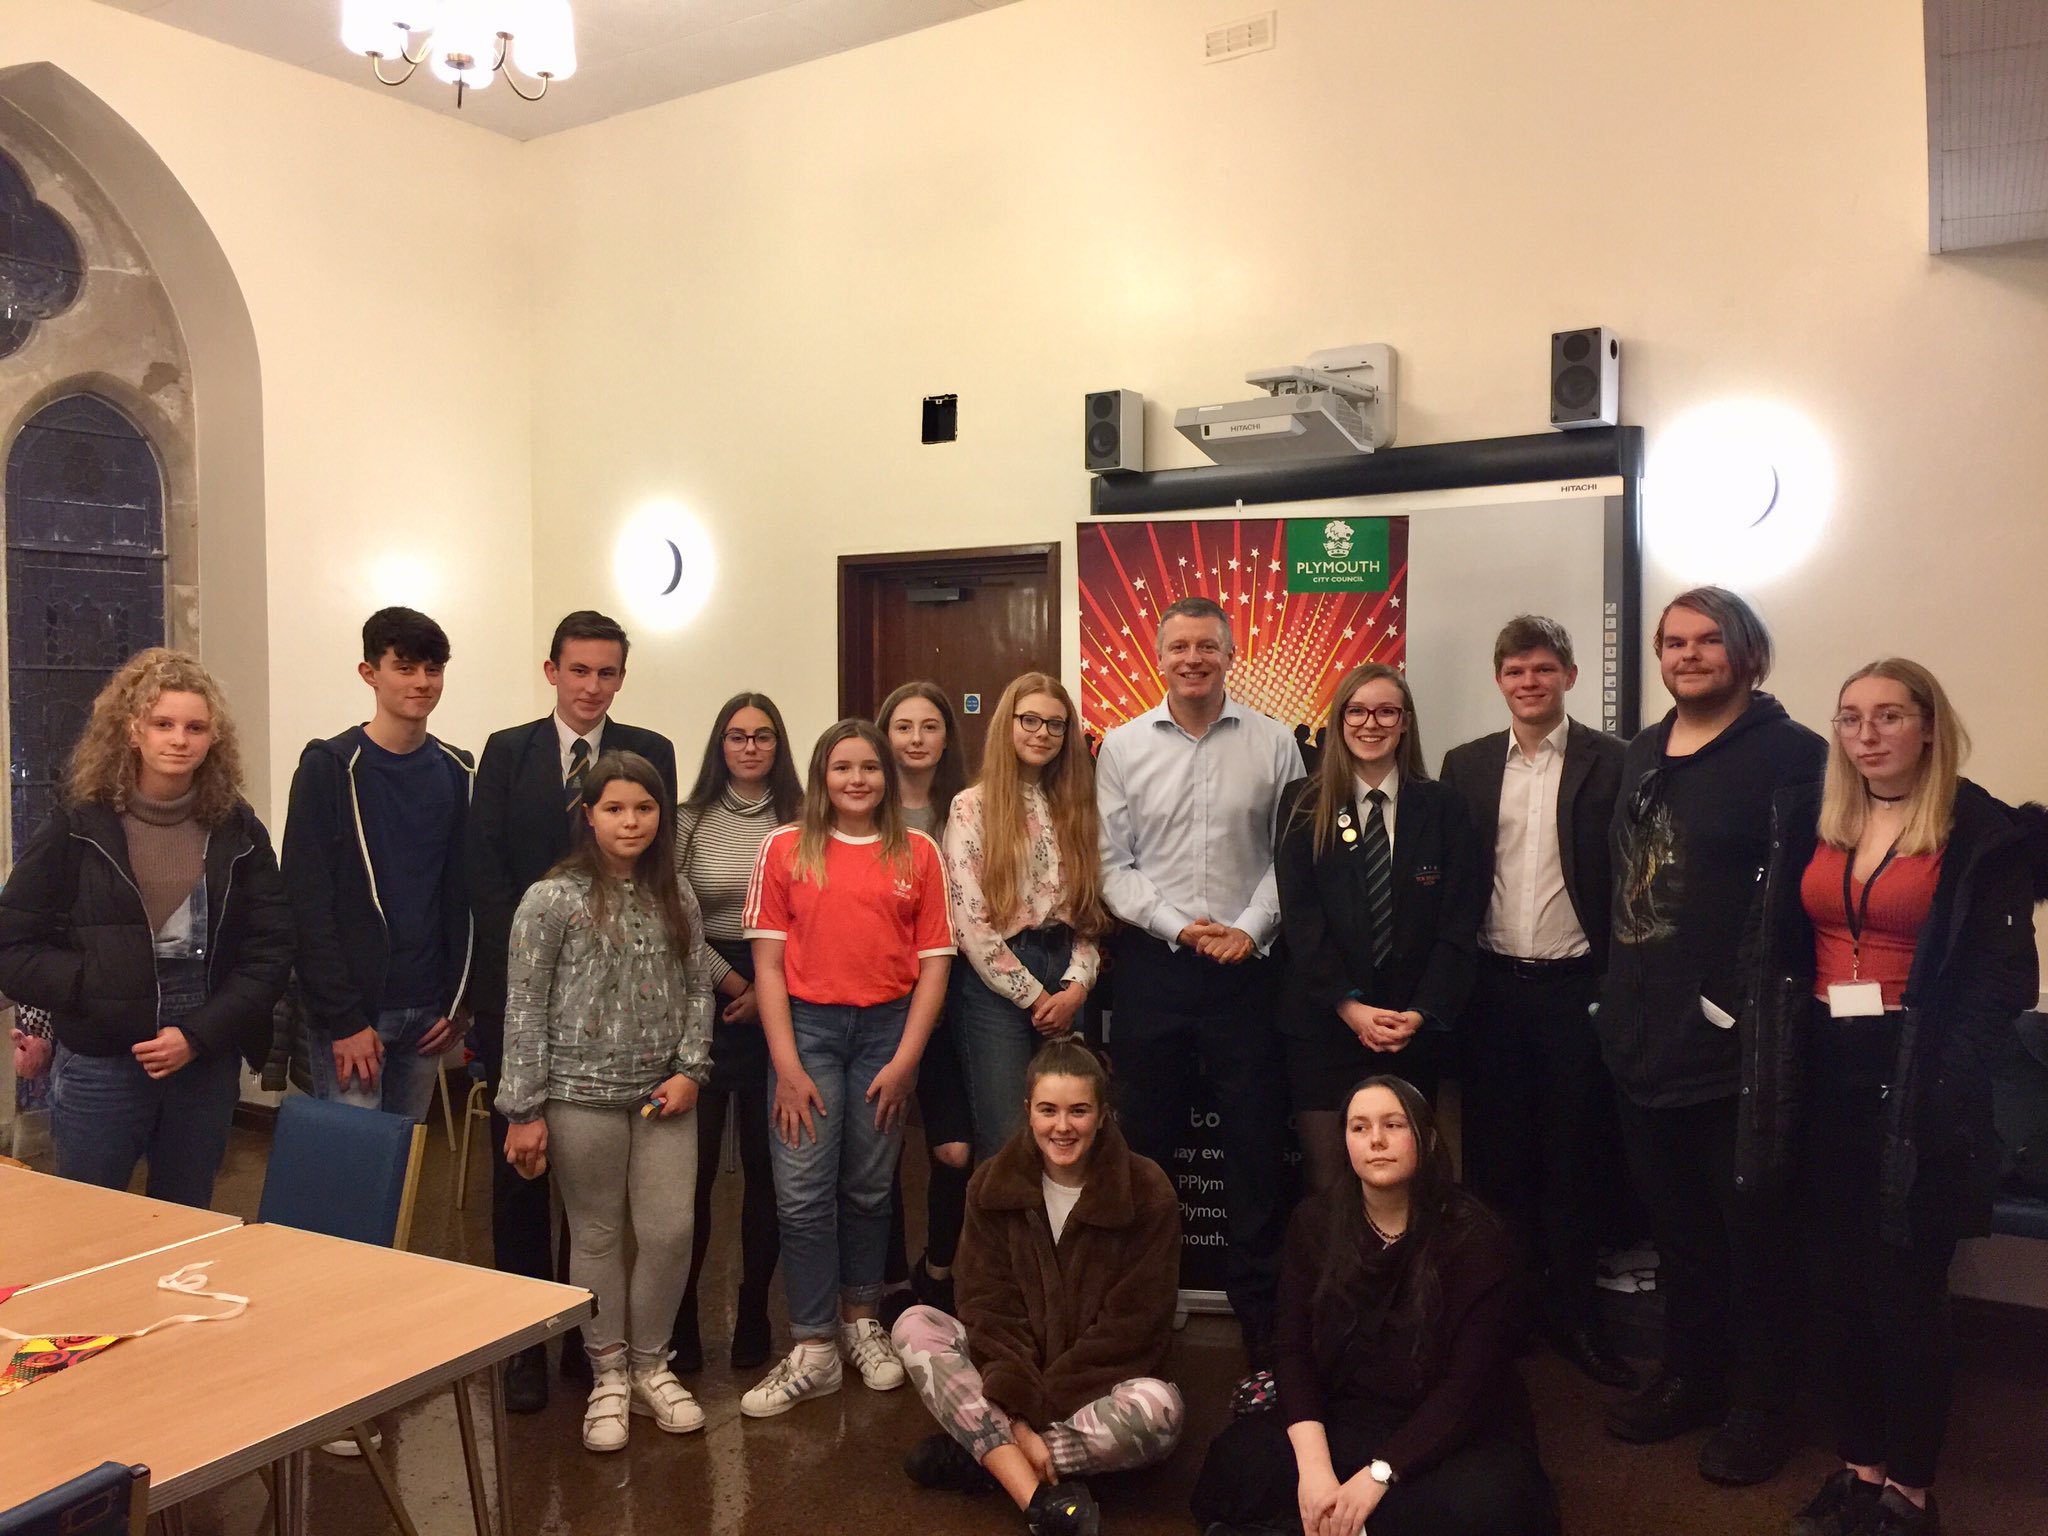 Luke meets with young people in Plymouth